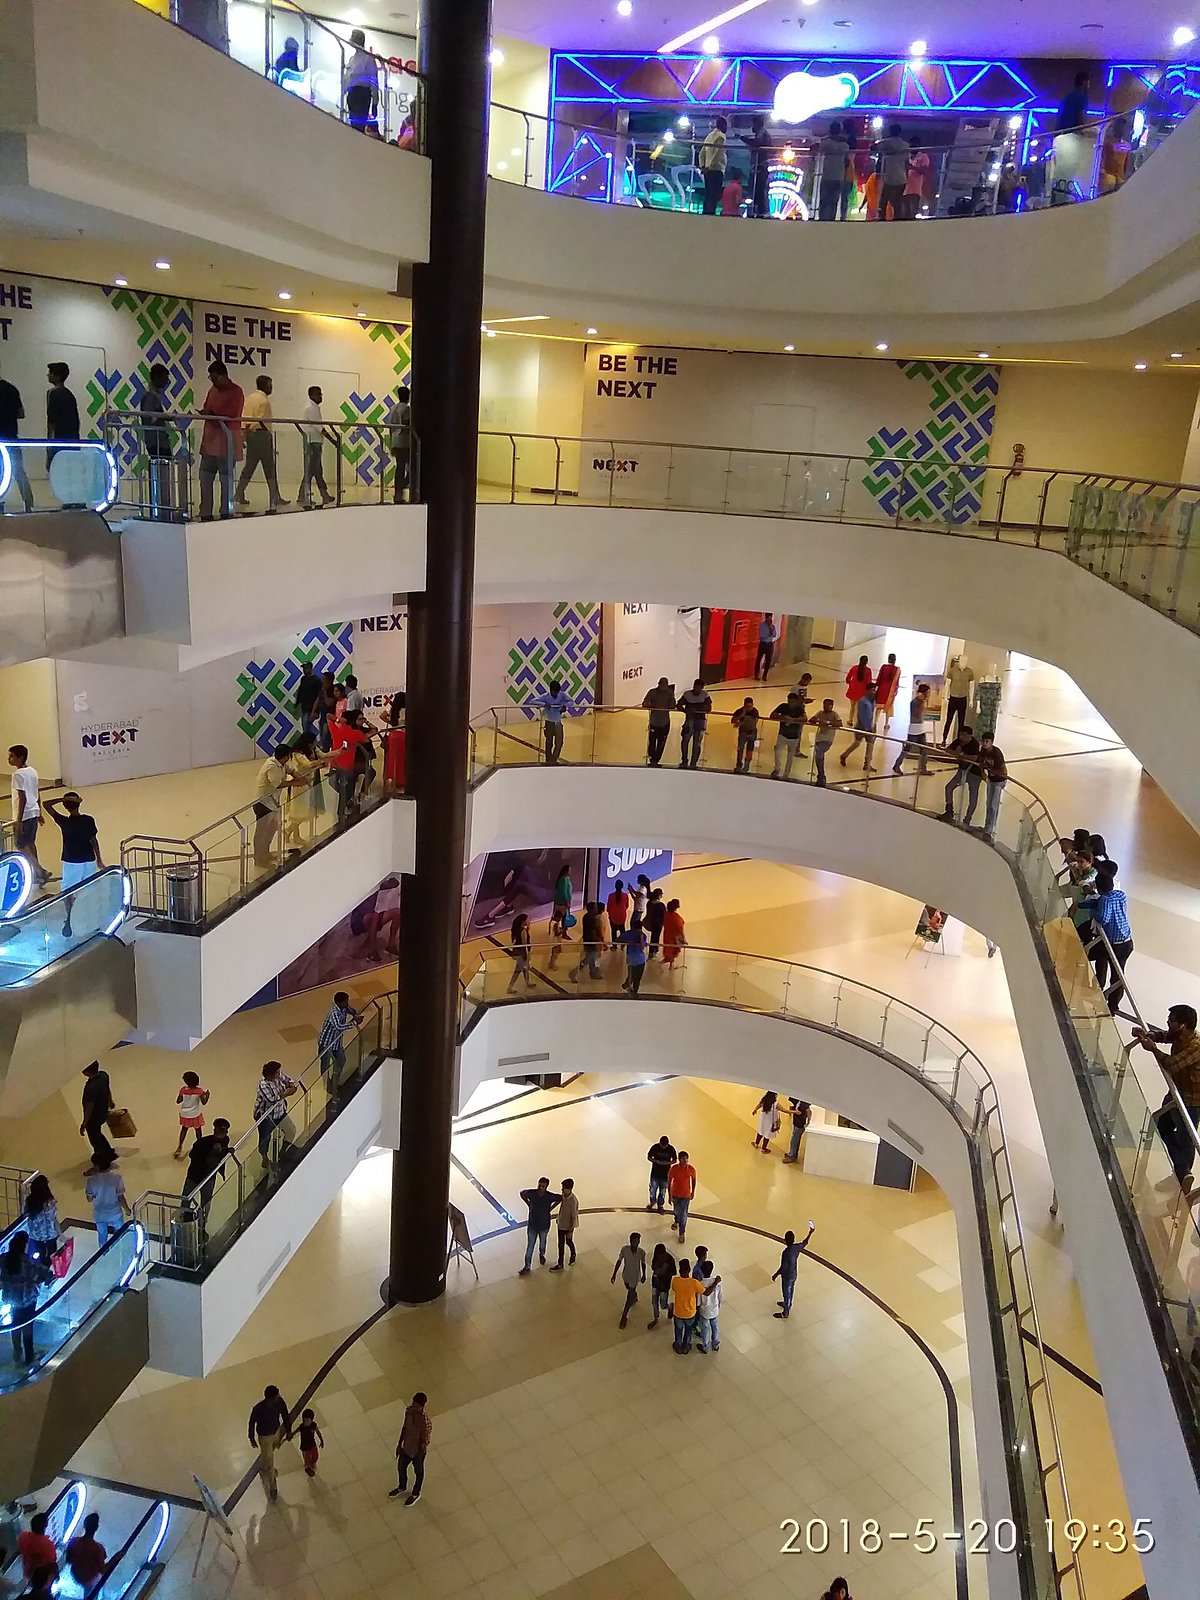 Next Galleria Mall (Hyderabad) - All You Need Know BEFORE You Go